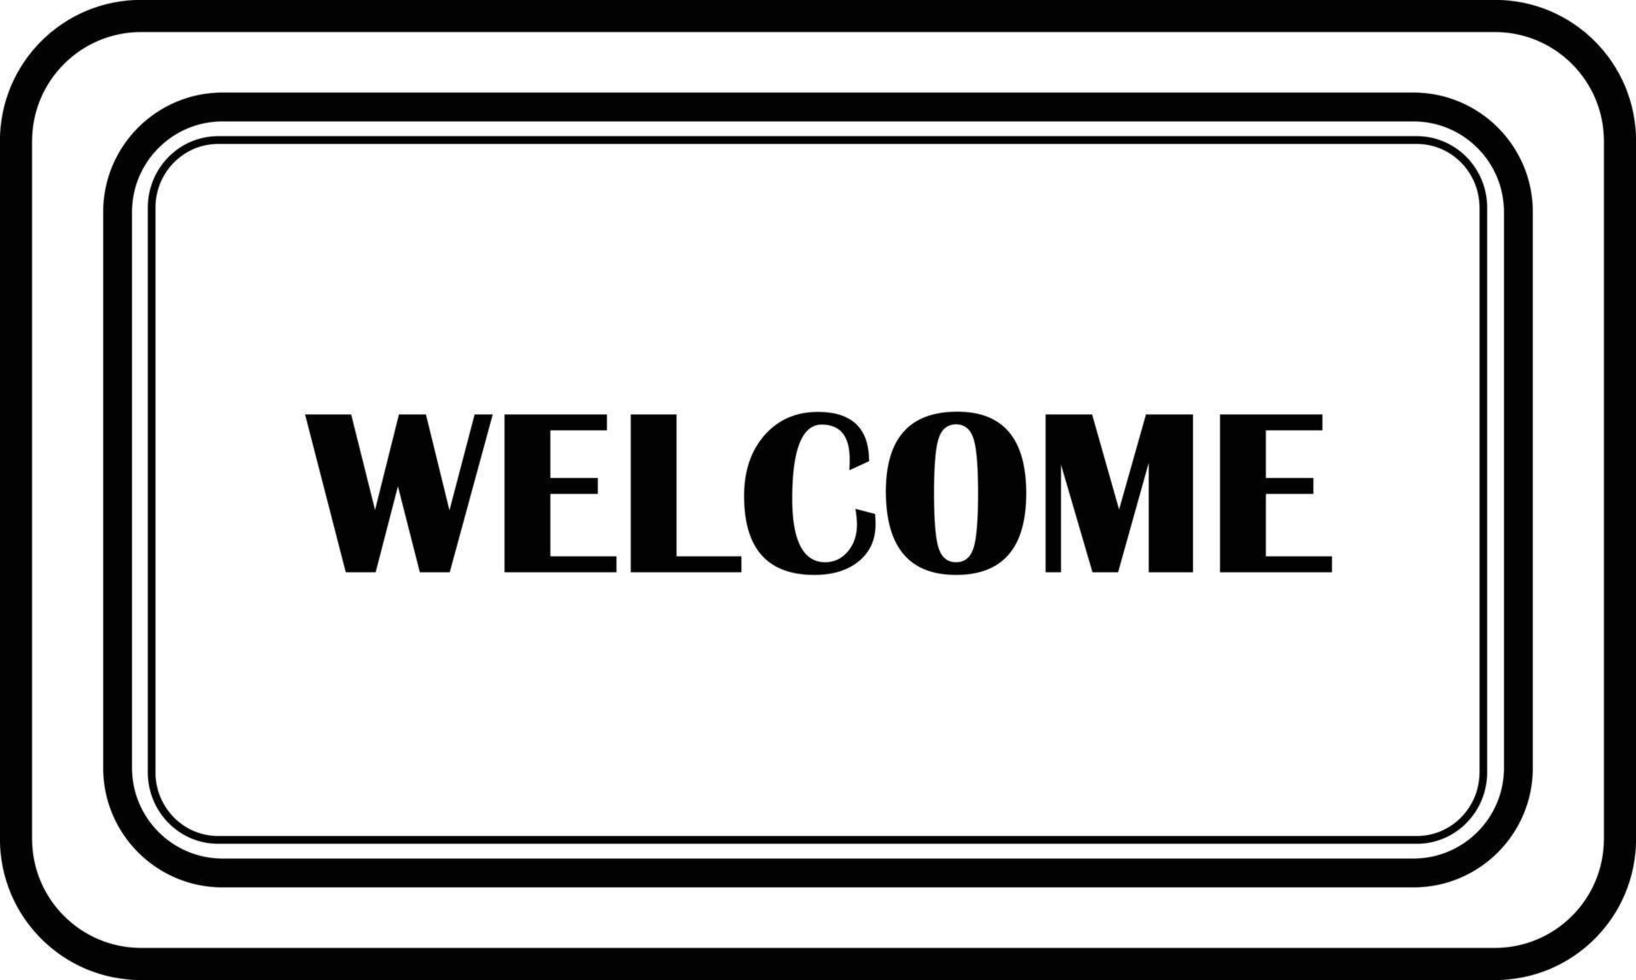 floor mat icon on white background. Welcome mat sign. flat style. vector